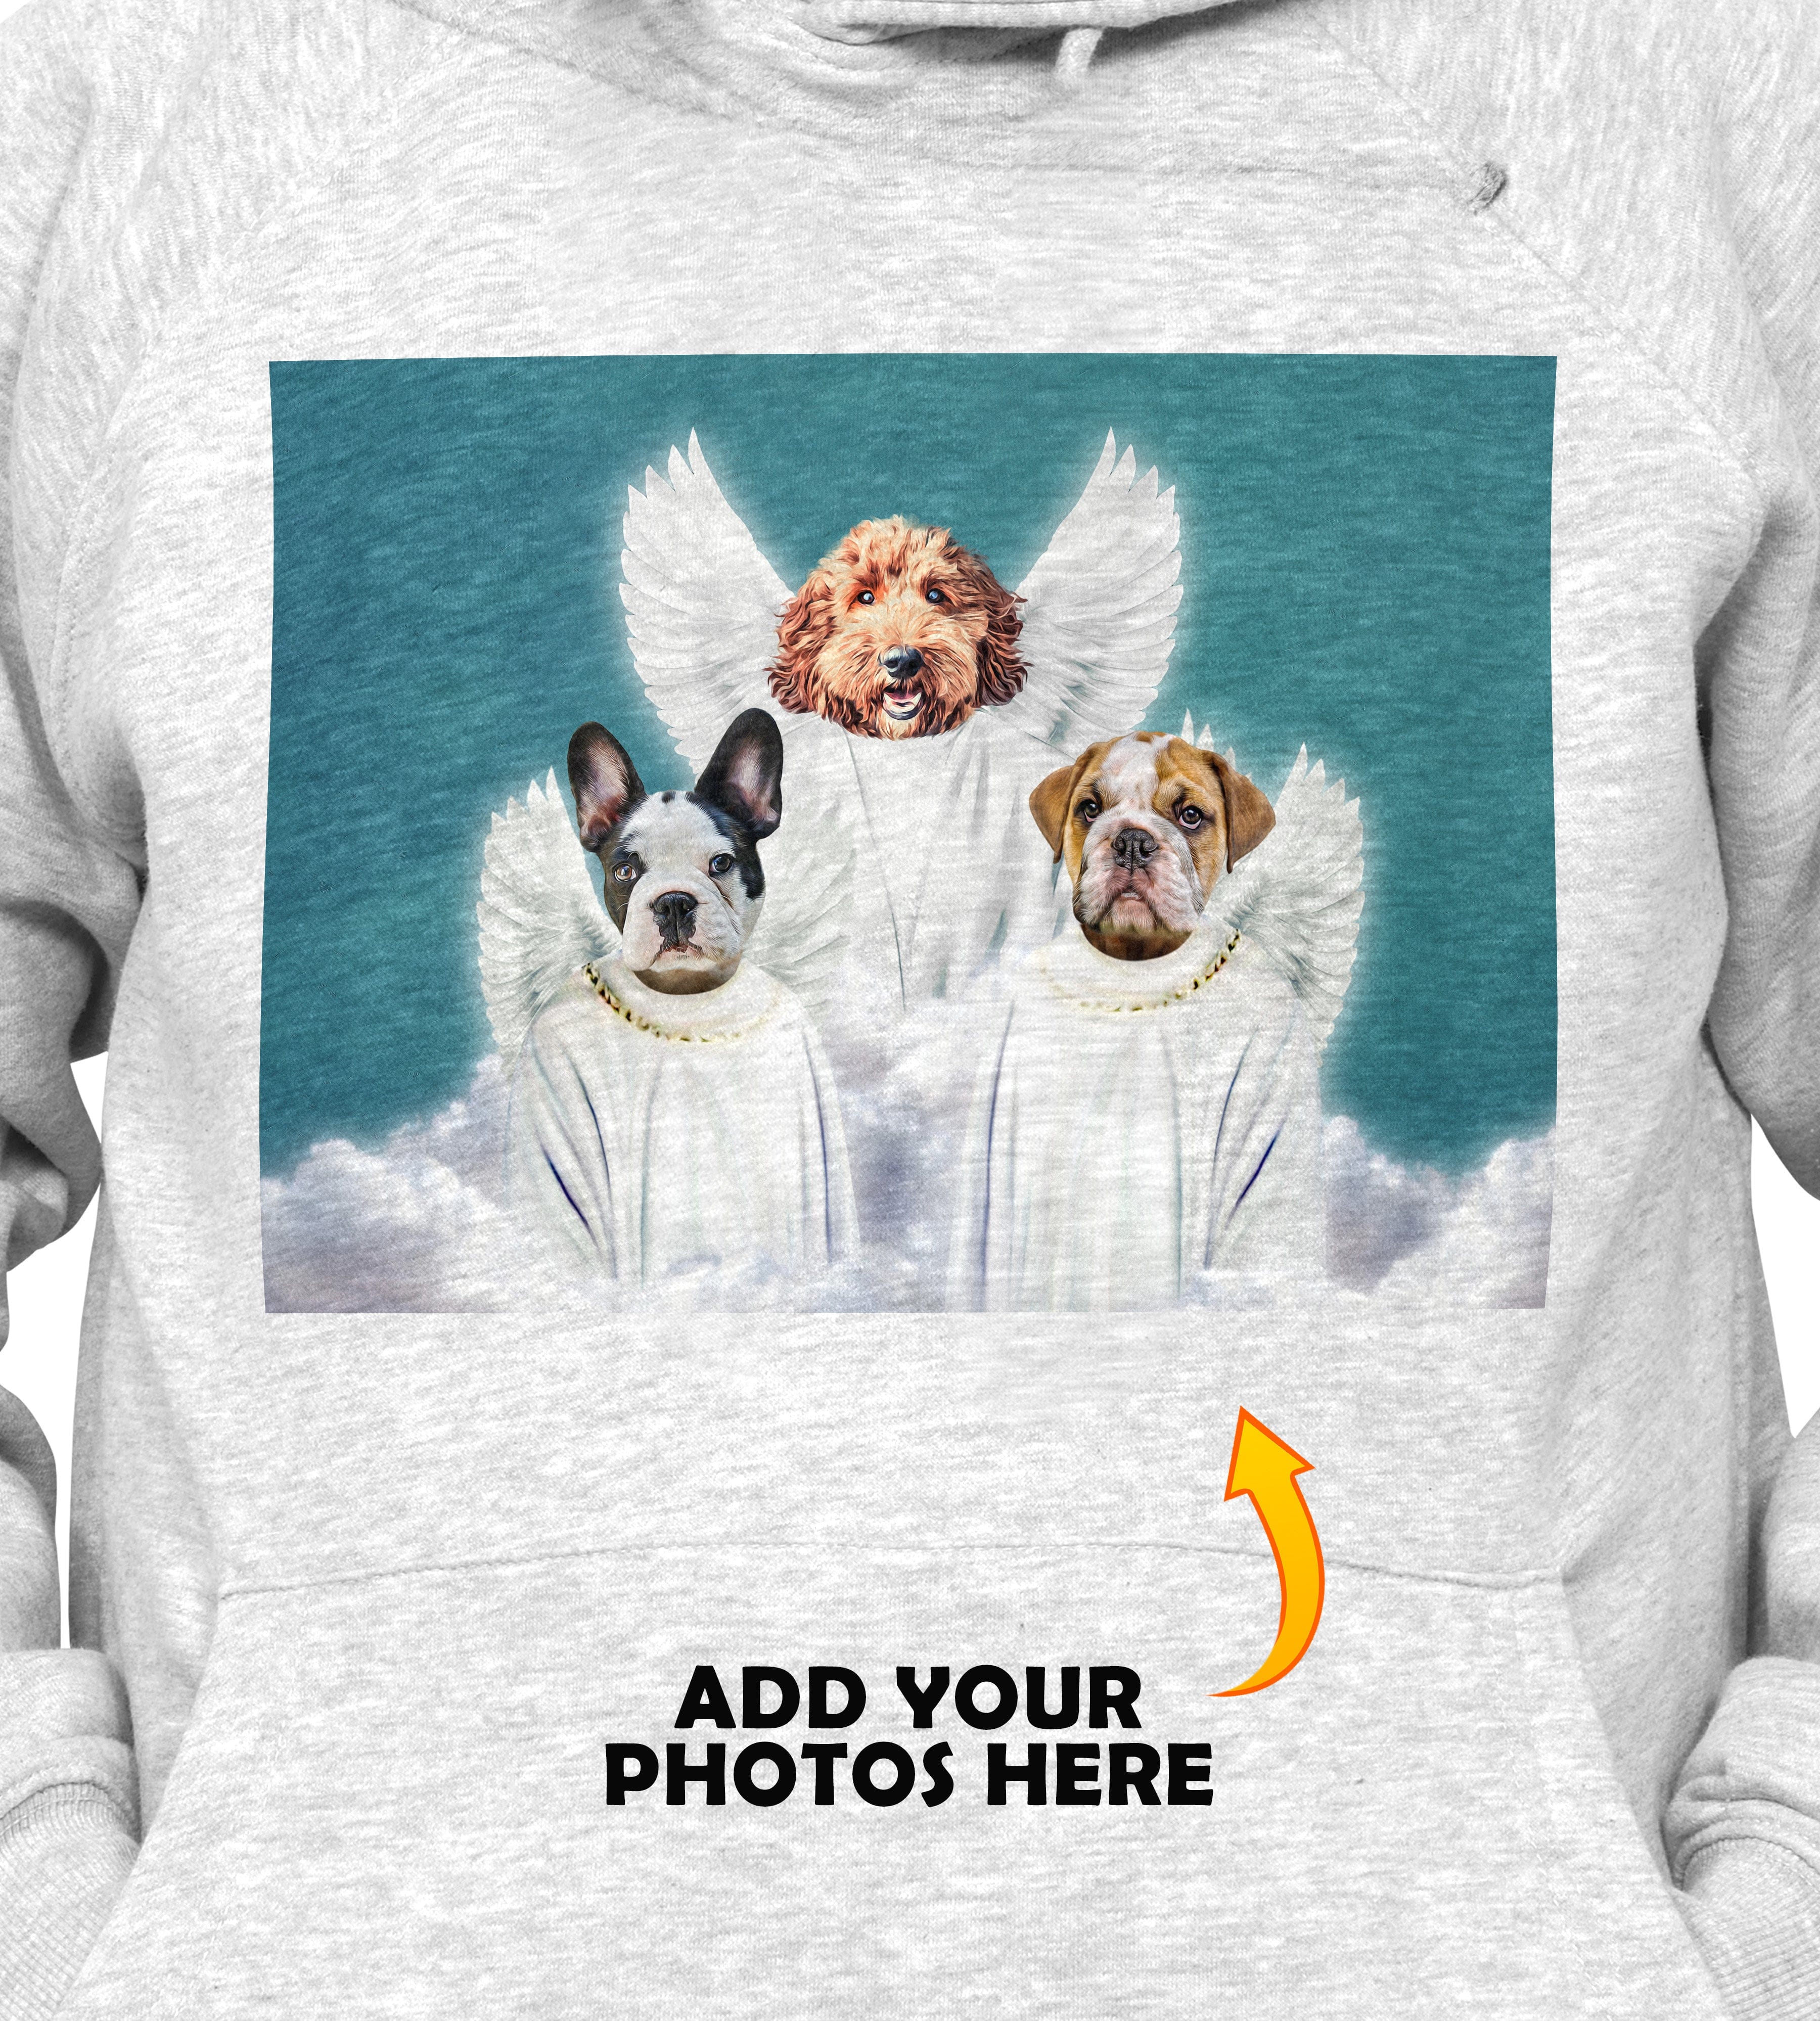 &#39;3 Angels&#39; Personalized 3 Pet Hoody